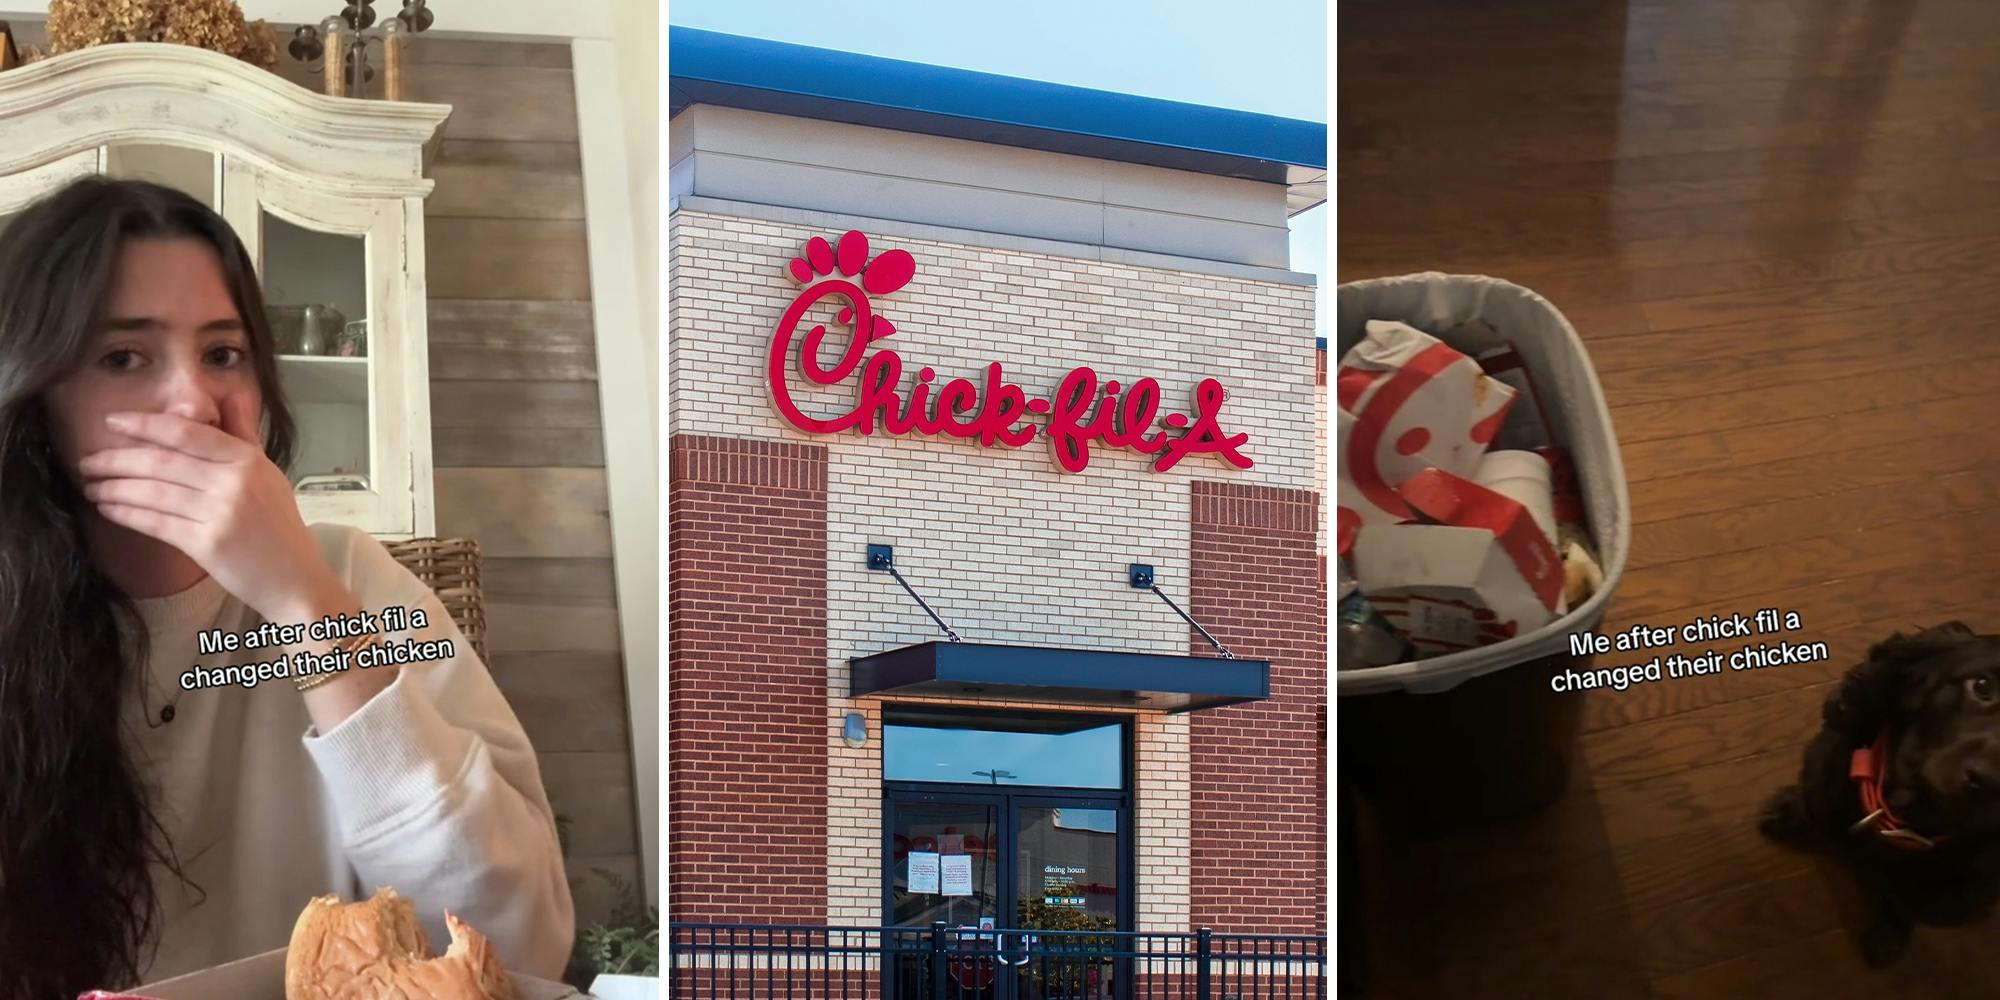 Customer claims Chick-fil-A ‘changed’ its chicken